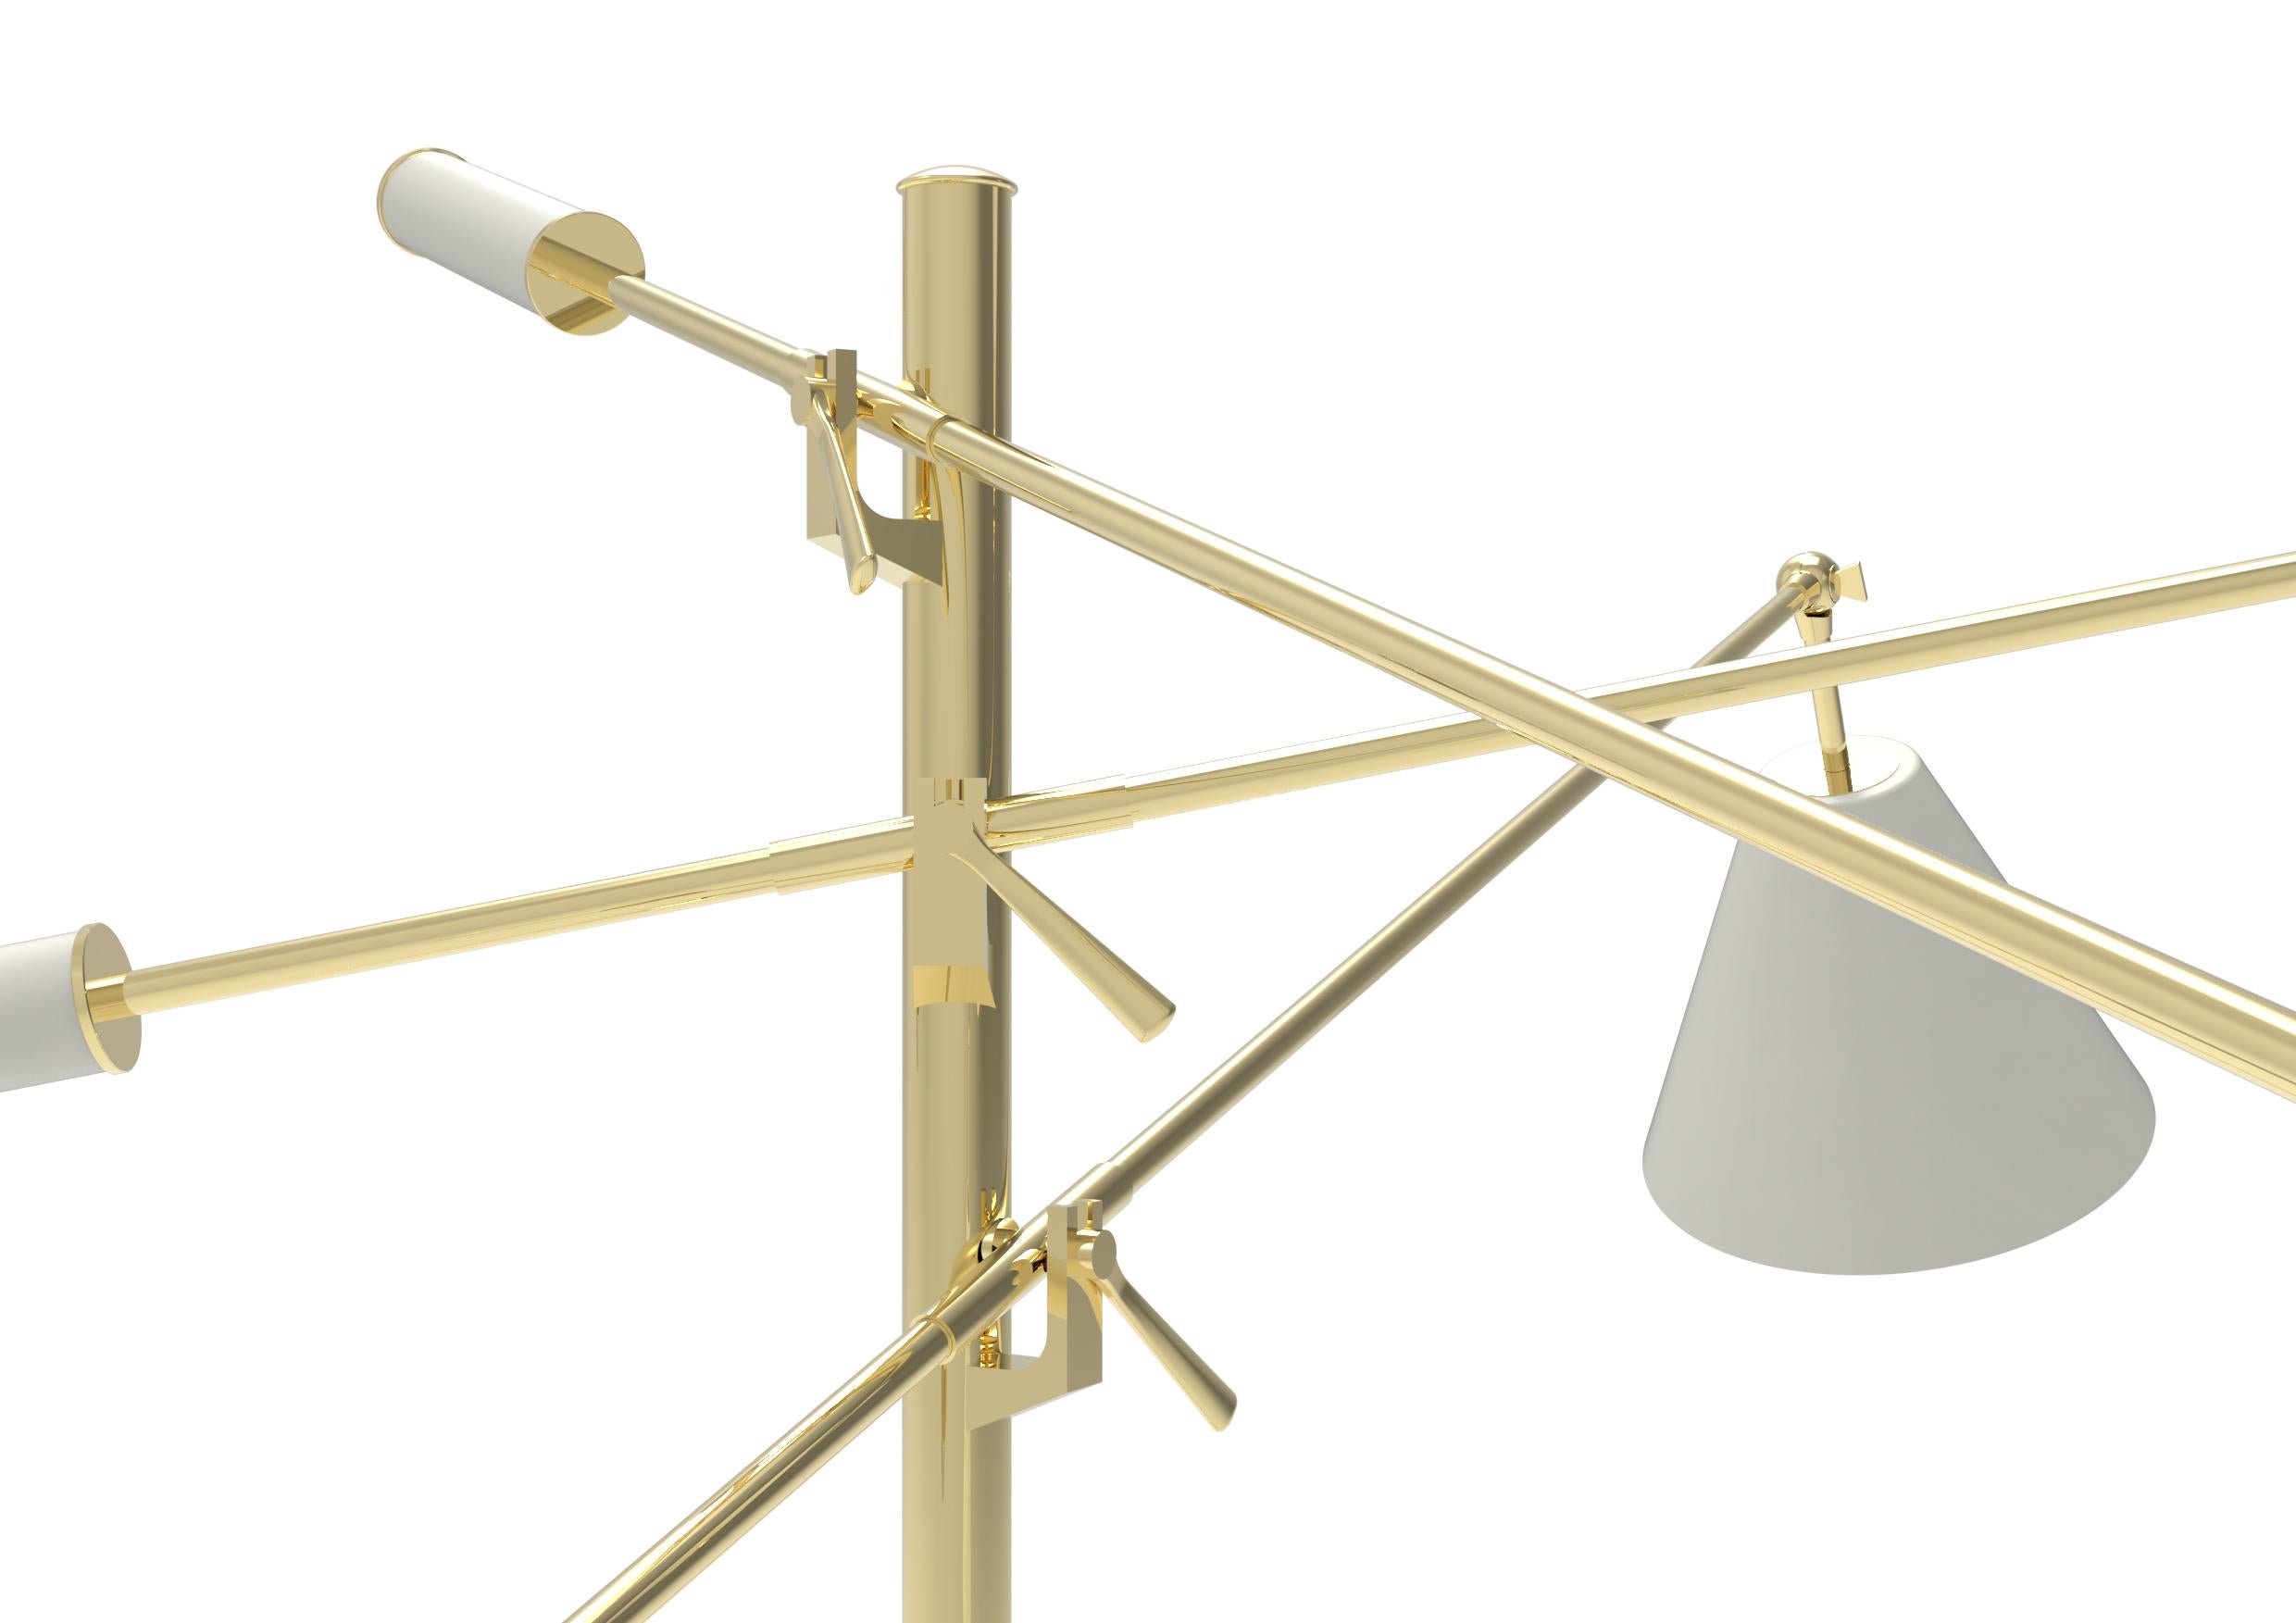 Icon of Arredoluce, symbol of an era and source of inspiration for many objects to follow over time, Triennale is perhaps the best known project by Angelo Lellii. Presented at the VII Milan Triennale in 1947, it is a floor lamp with a brass linear